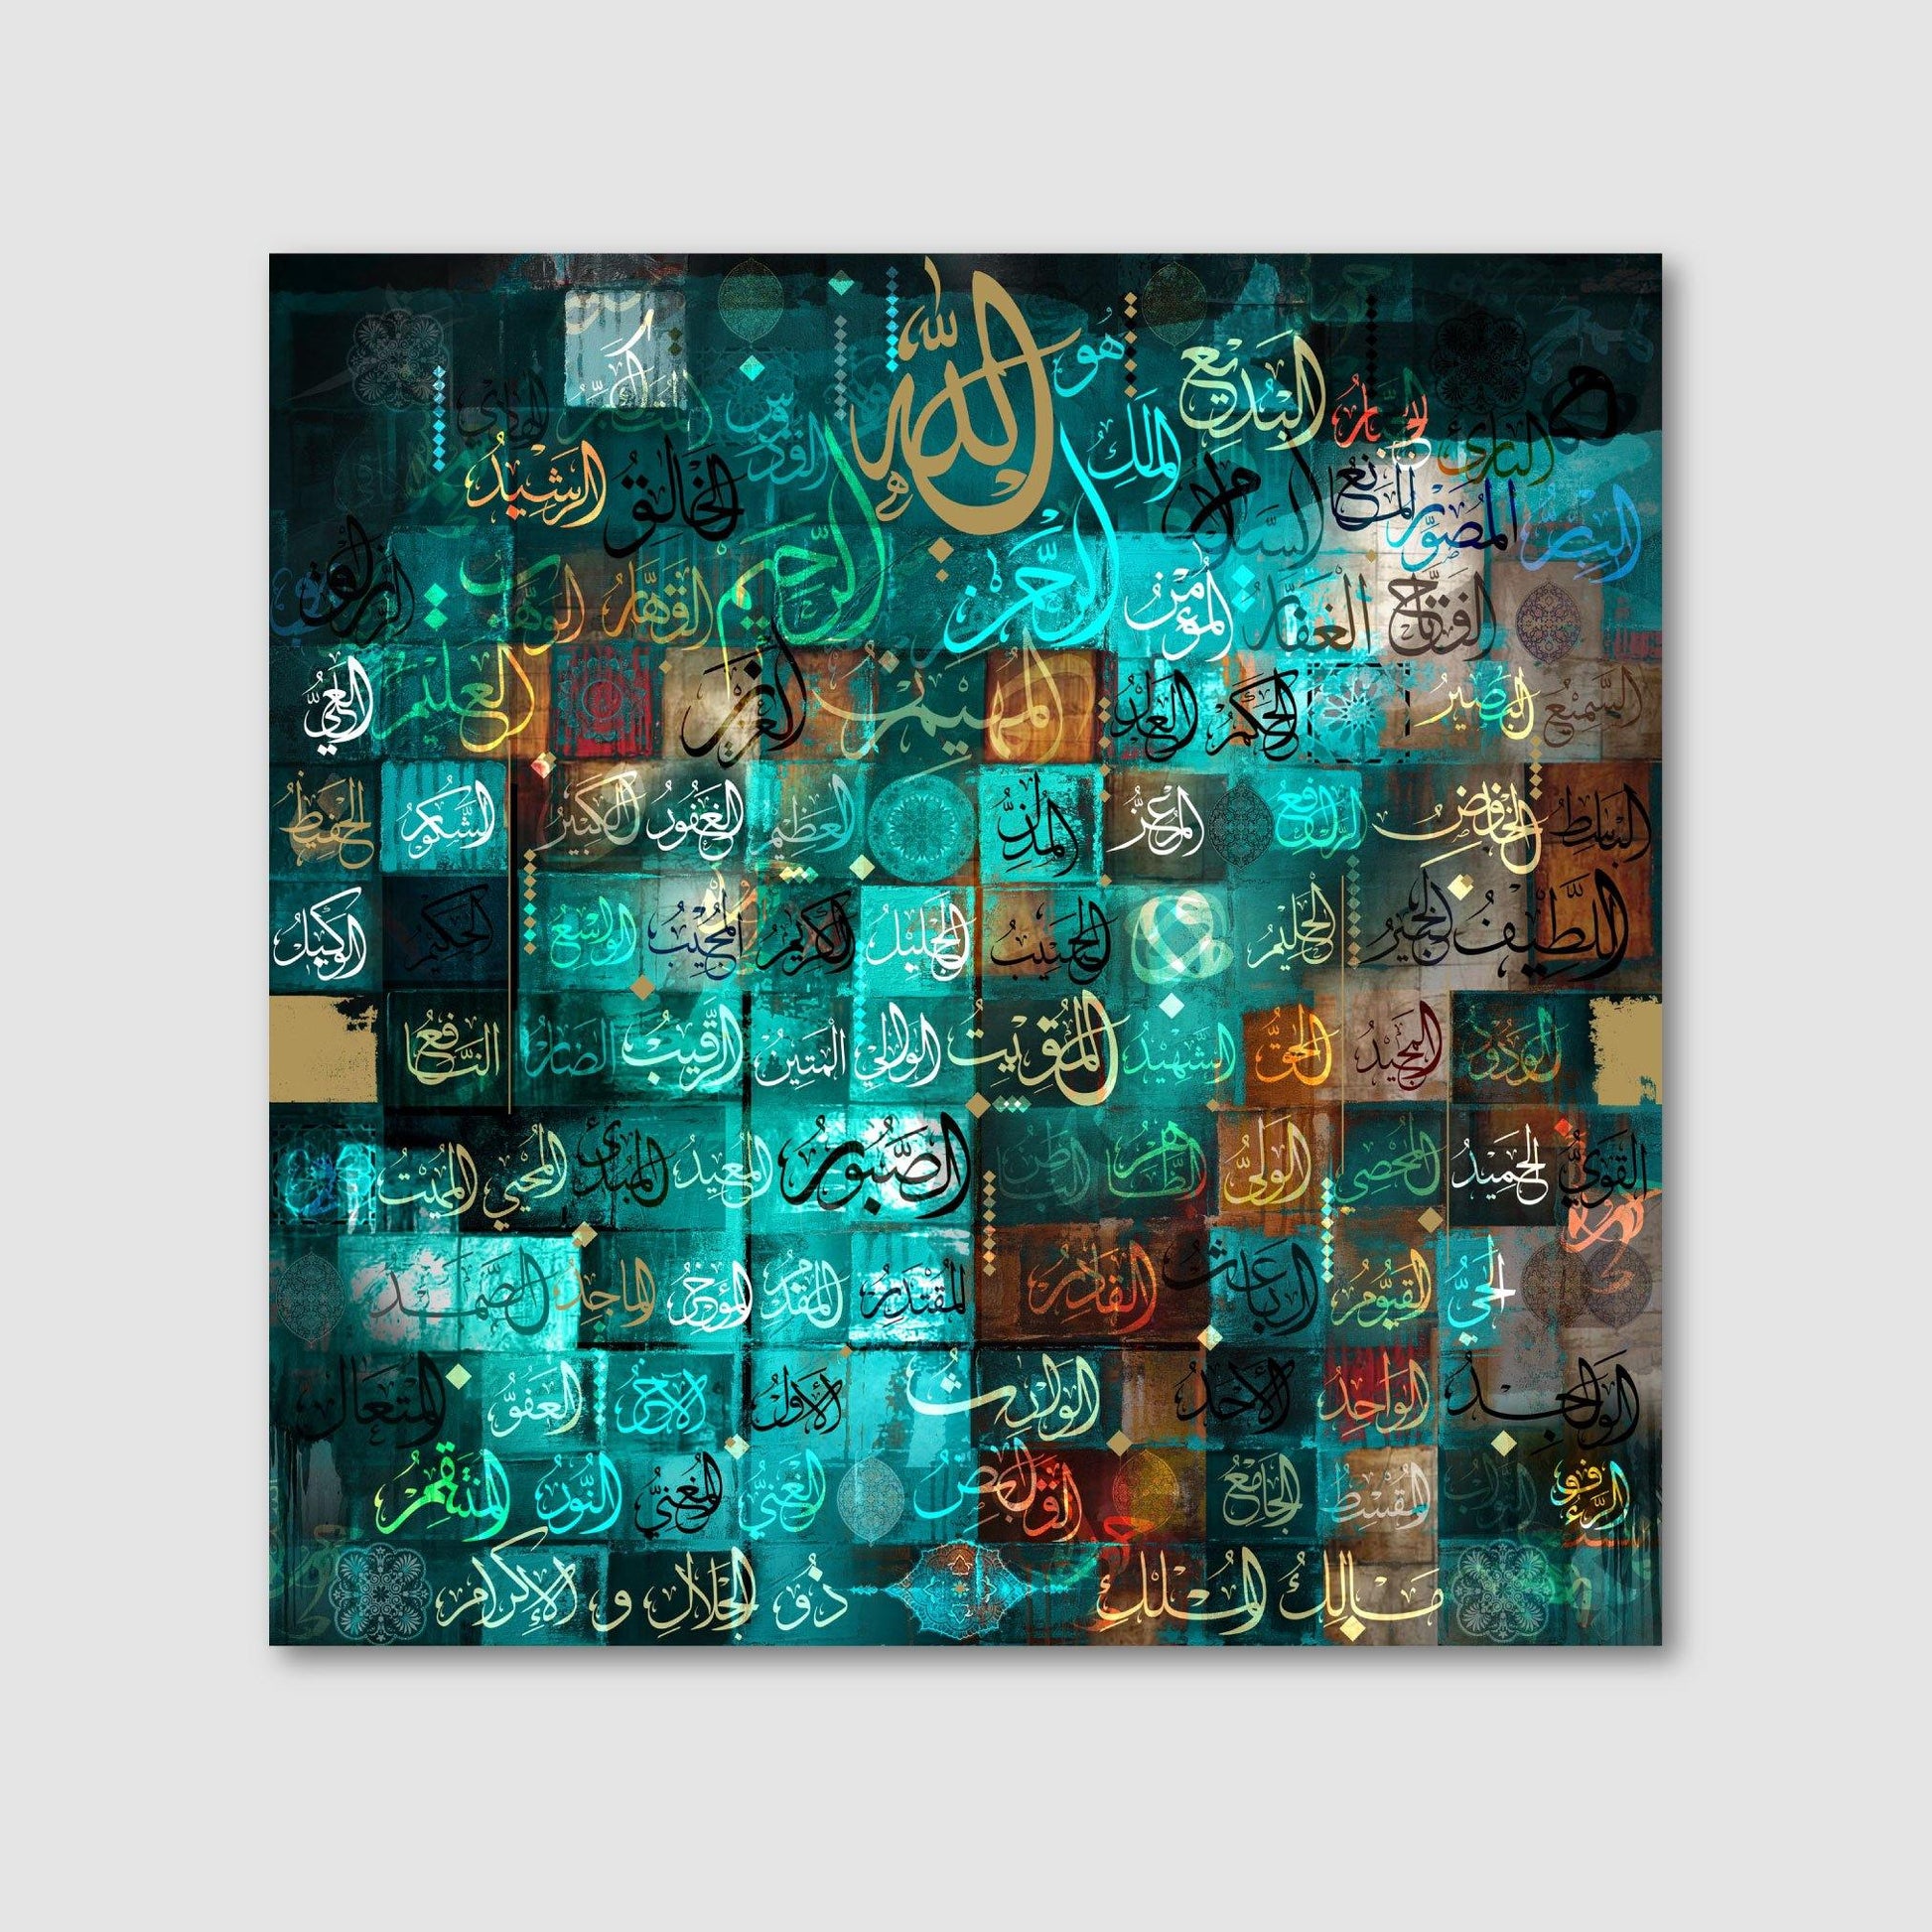 Square Turquoise 99 Names of Allah - The Art Gallery Modern Arabic Calligraphy by Helen Abbas